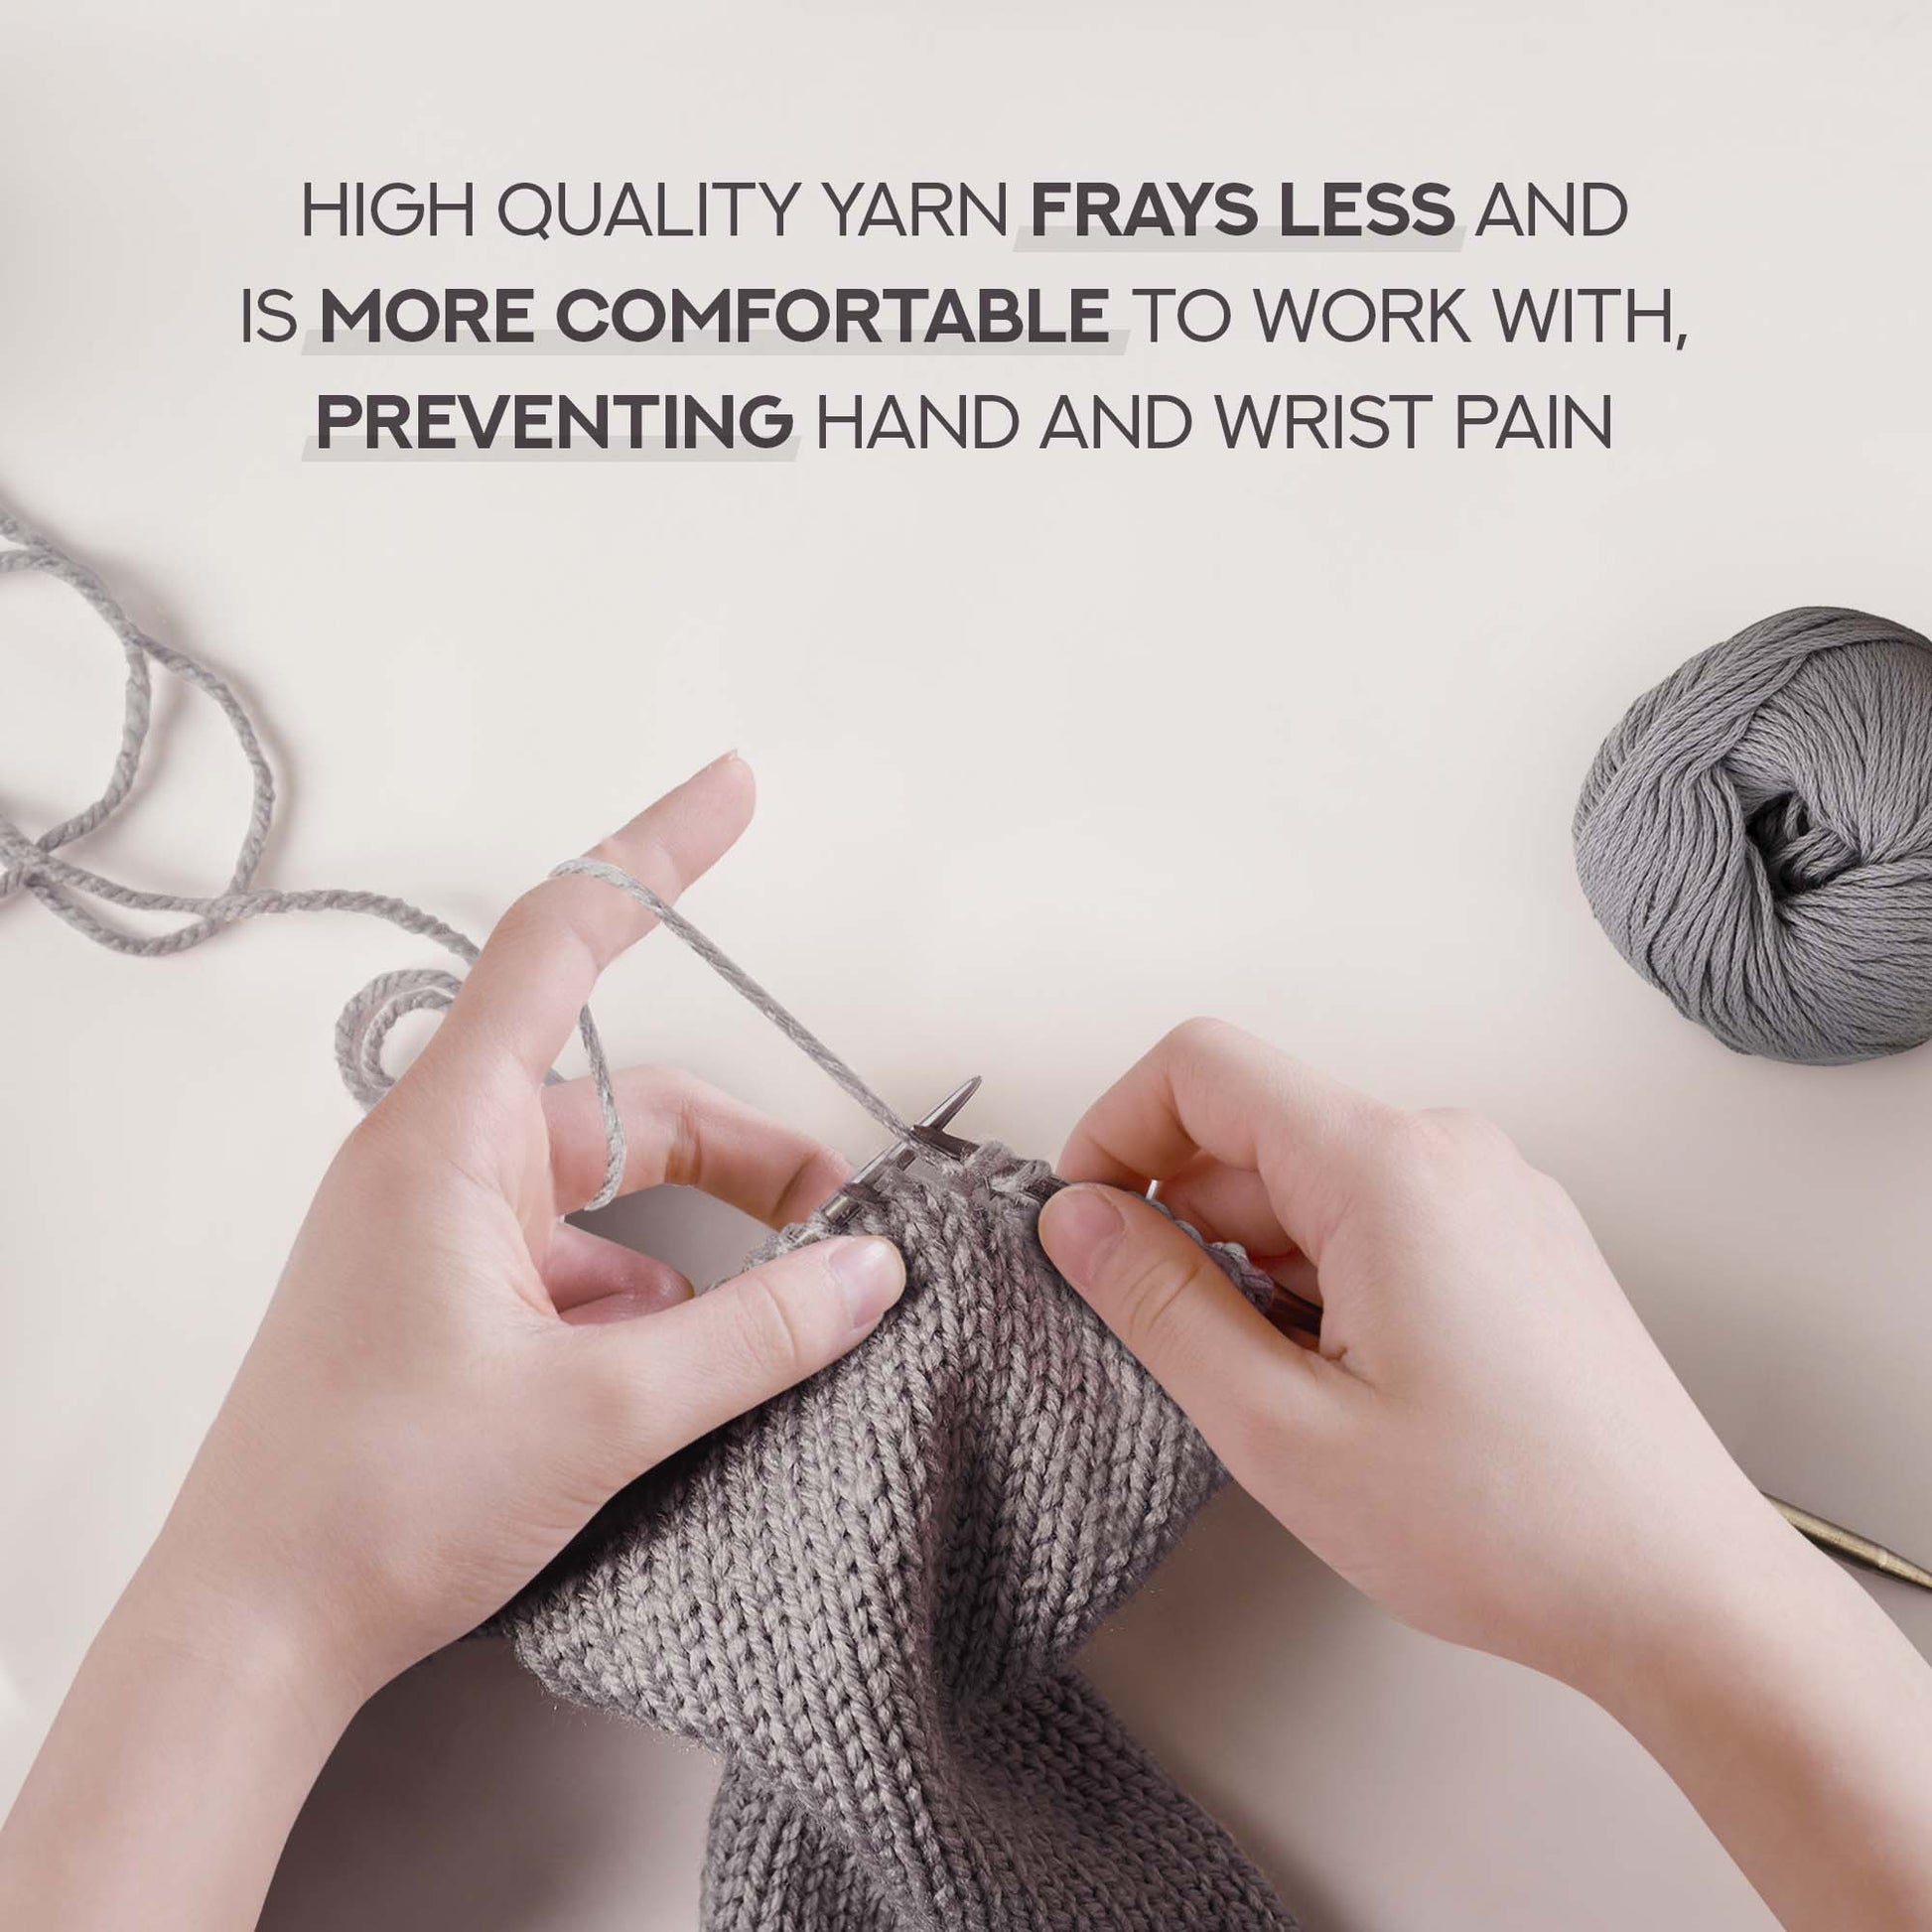 High quality yarn frays less and is more comfortable to work with, preventing hand and wrist pain.